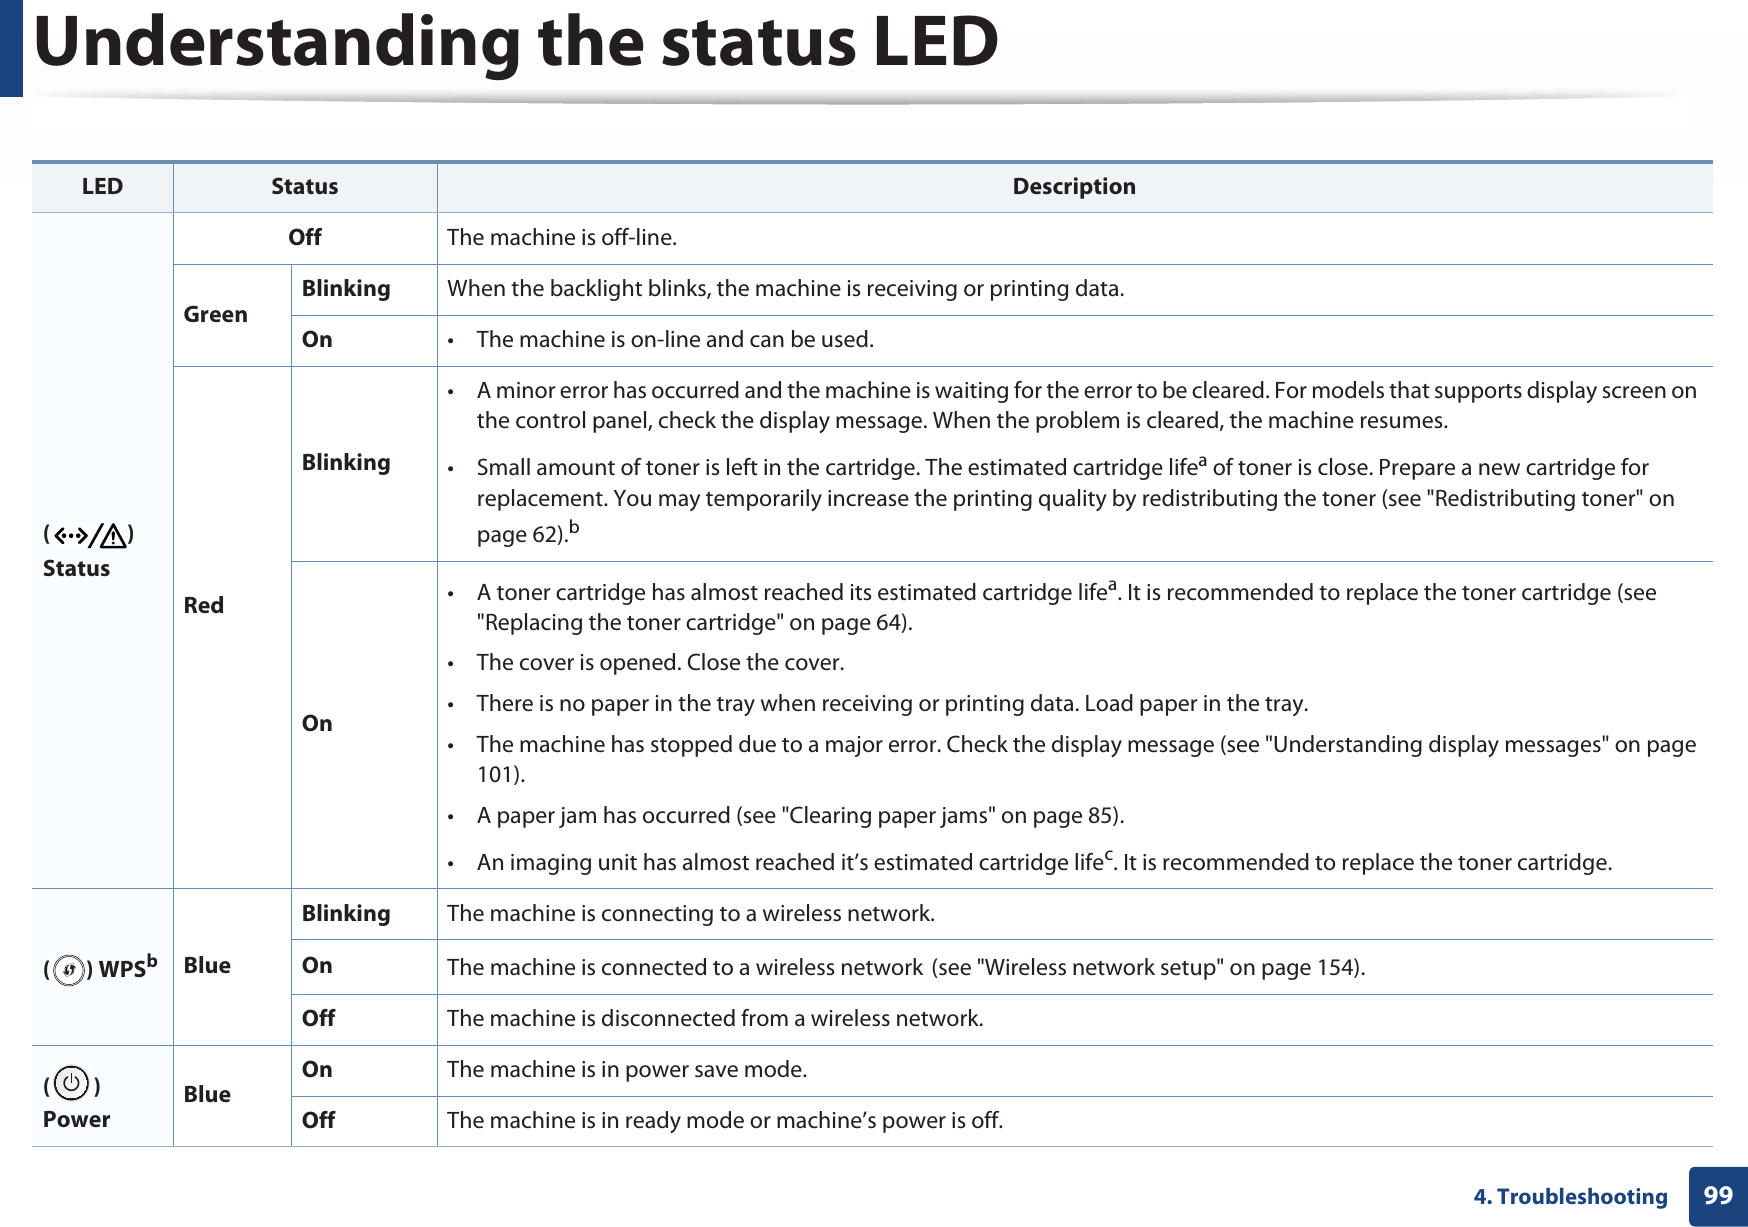 Understanding the status LED994. Troubleshooting LED Status Description() StatusOff The machine is off-line.GreenBlinking When the backlight blinks, the machine is receiving or printing data.On • The machine is on-line and can be used.RedBlinking• A minor error has occurred and the machine is waiting for the error to be cleared. For models that supports display screen on the control panel, check the display message. When the problem is cleared, the machine resumes.• Small amount of toner is left in the cartridge. The estimated cartridge lifea of toner is close. Prepare a new cartridge for replacement. You may temporarily increase the printing quality by redistributing the toner (see &quot;Redistributing toner&quot; on page 62).bOn• A toner cartridge has almost reached its estimated cartridge lifea. It is recommended to replace the toner cartridge (see &quot;Replacing the toner cartridge&quot; on page 64).• The cover is opened. Close the cover.• There is no paper in the tray when receiving or printing data. Load paper in the tray. • The machine has stopped due to a major error. Check the display message (see &quot;Understanding display messages&quot; on page 101). • A paper jam has occurred (see &quot;Clearing paper jams&quot; on page 85).• An imaging unit has almost reached it’s estimated cartridge lifec. It is recommended to replace the toner cartridge.() WPSbBlueBlinking The machine is connecting to a wireless network.On The machine is connected to a wireless networkG(see &quot;Wireless network setup&quot; on page 154).Off The machine is disconnected from a wireless network.() Power BlueOn The machine is in power save mode.Off The machine is in ready mode or machine’s power is off.